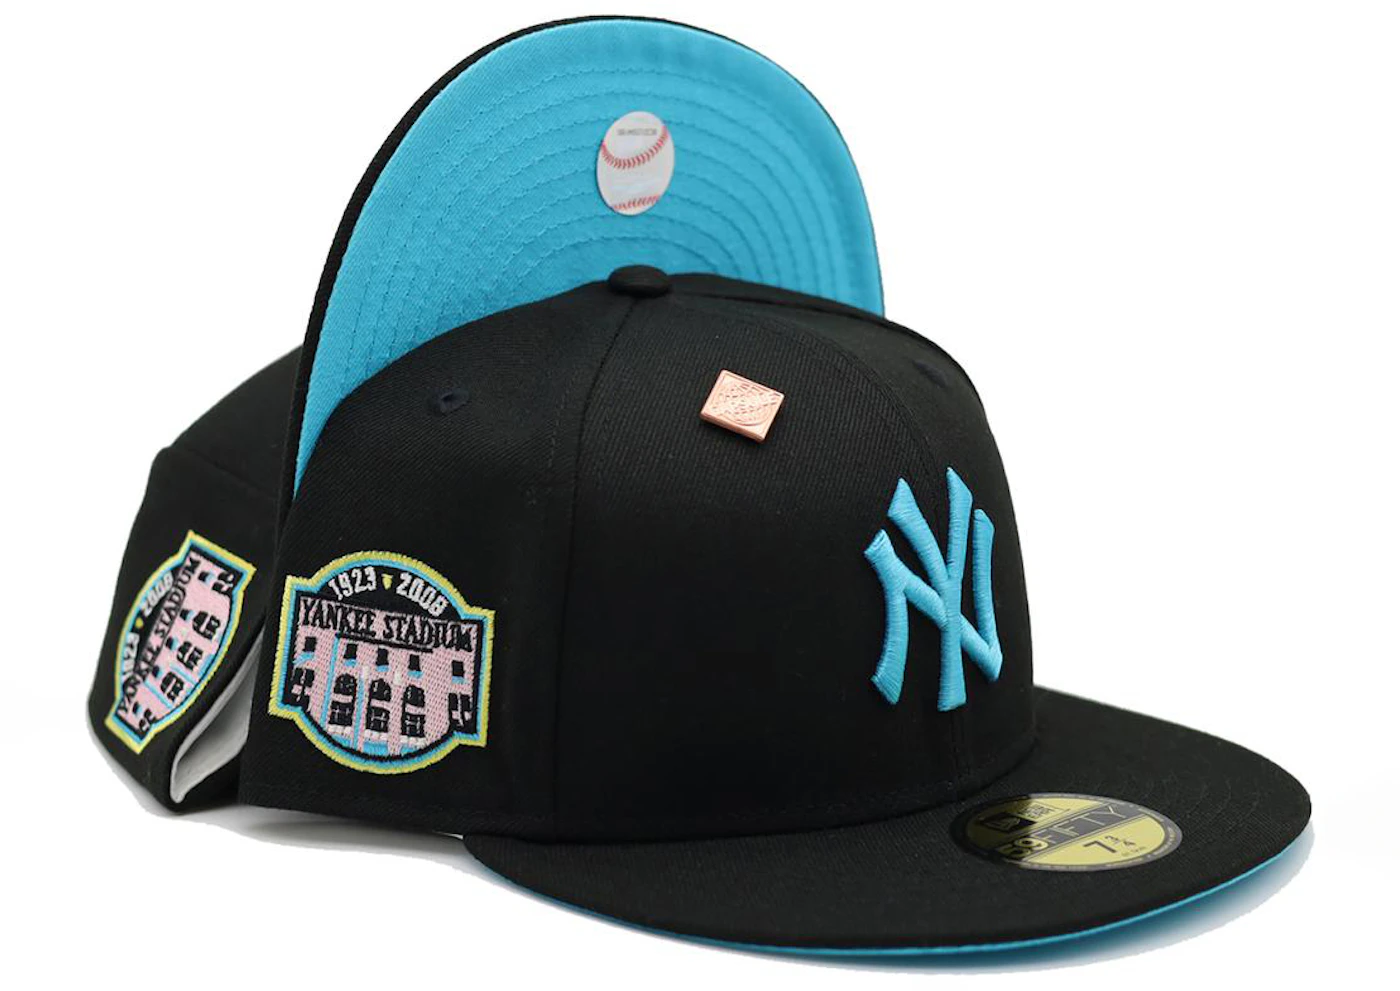 New York Yankees Clubhouse 950 Black/White